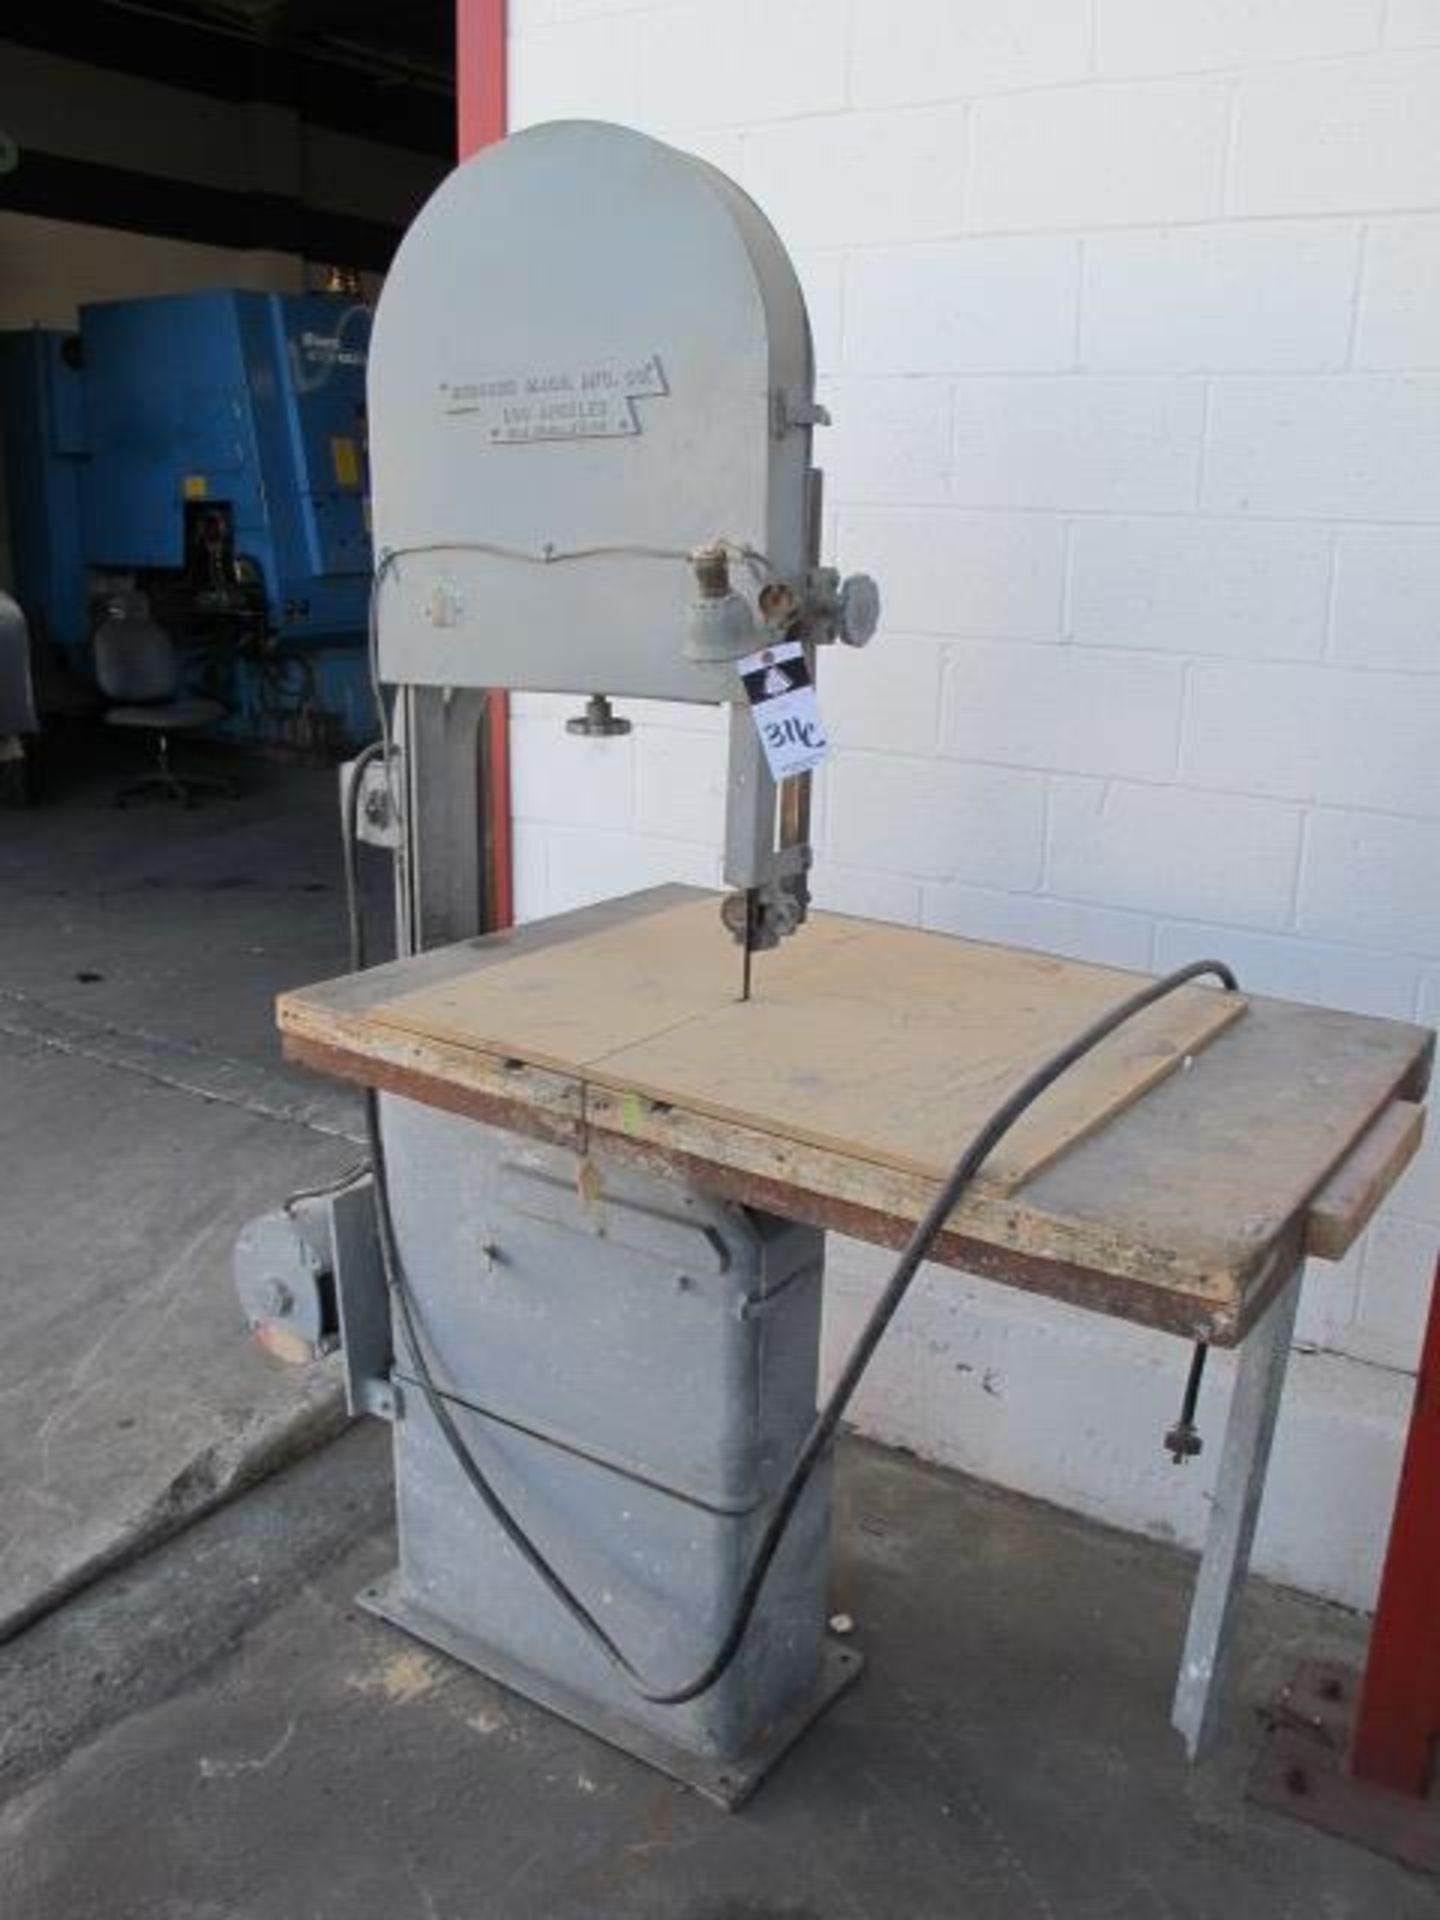 Rodgers mdl. B-20 19" Vertical Band Saw s/n 41371